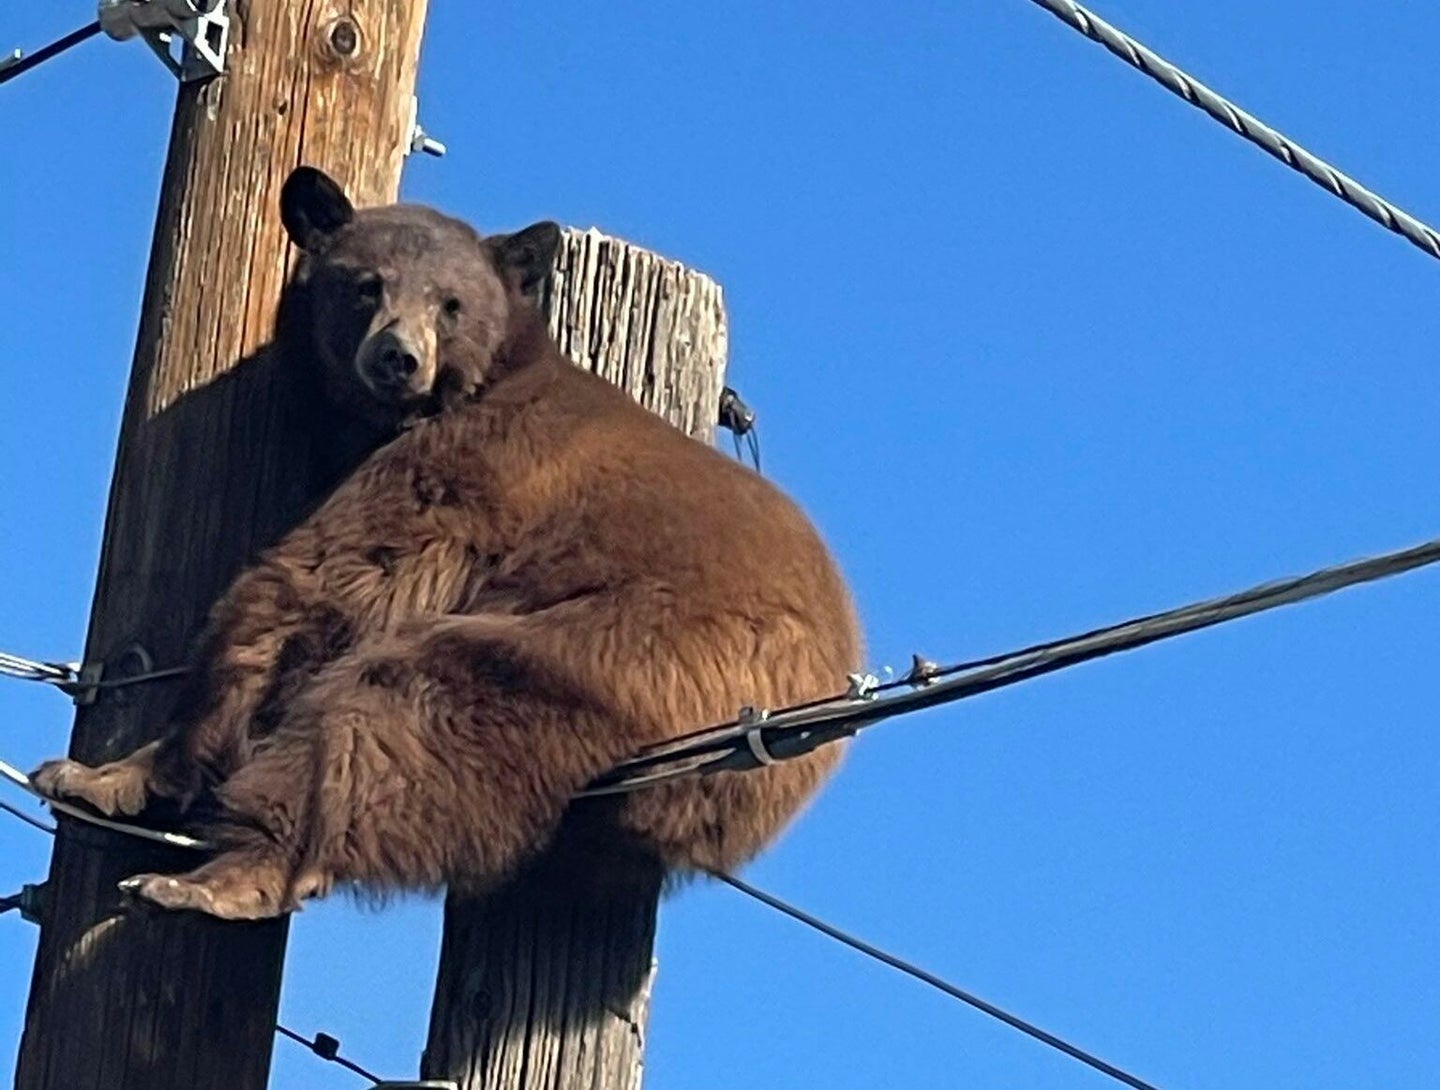 This black bear was finally coaxed down from Arizona high-tension wires.